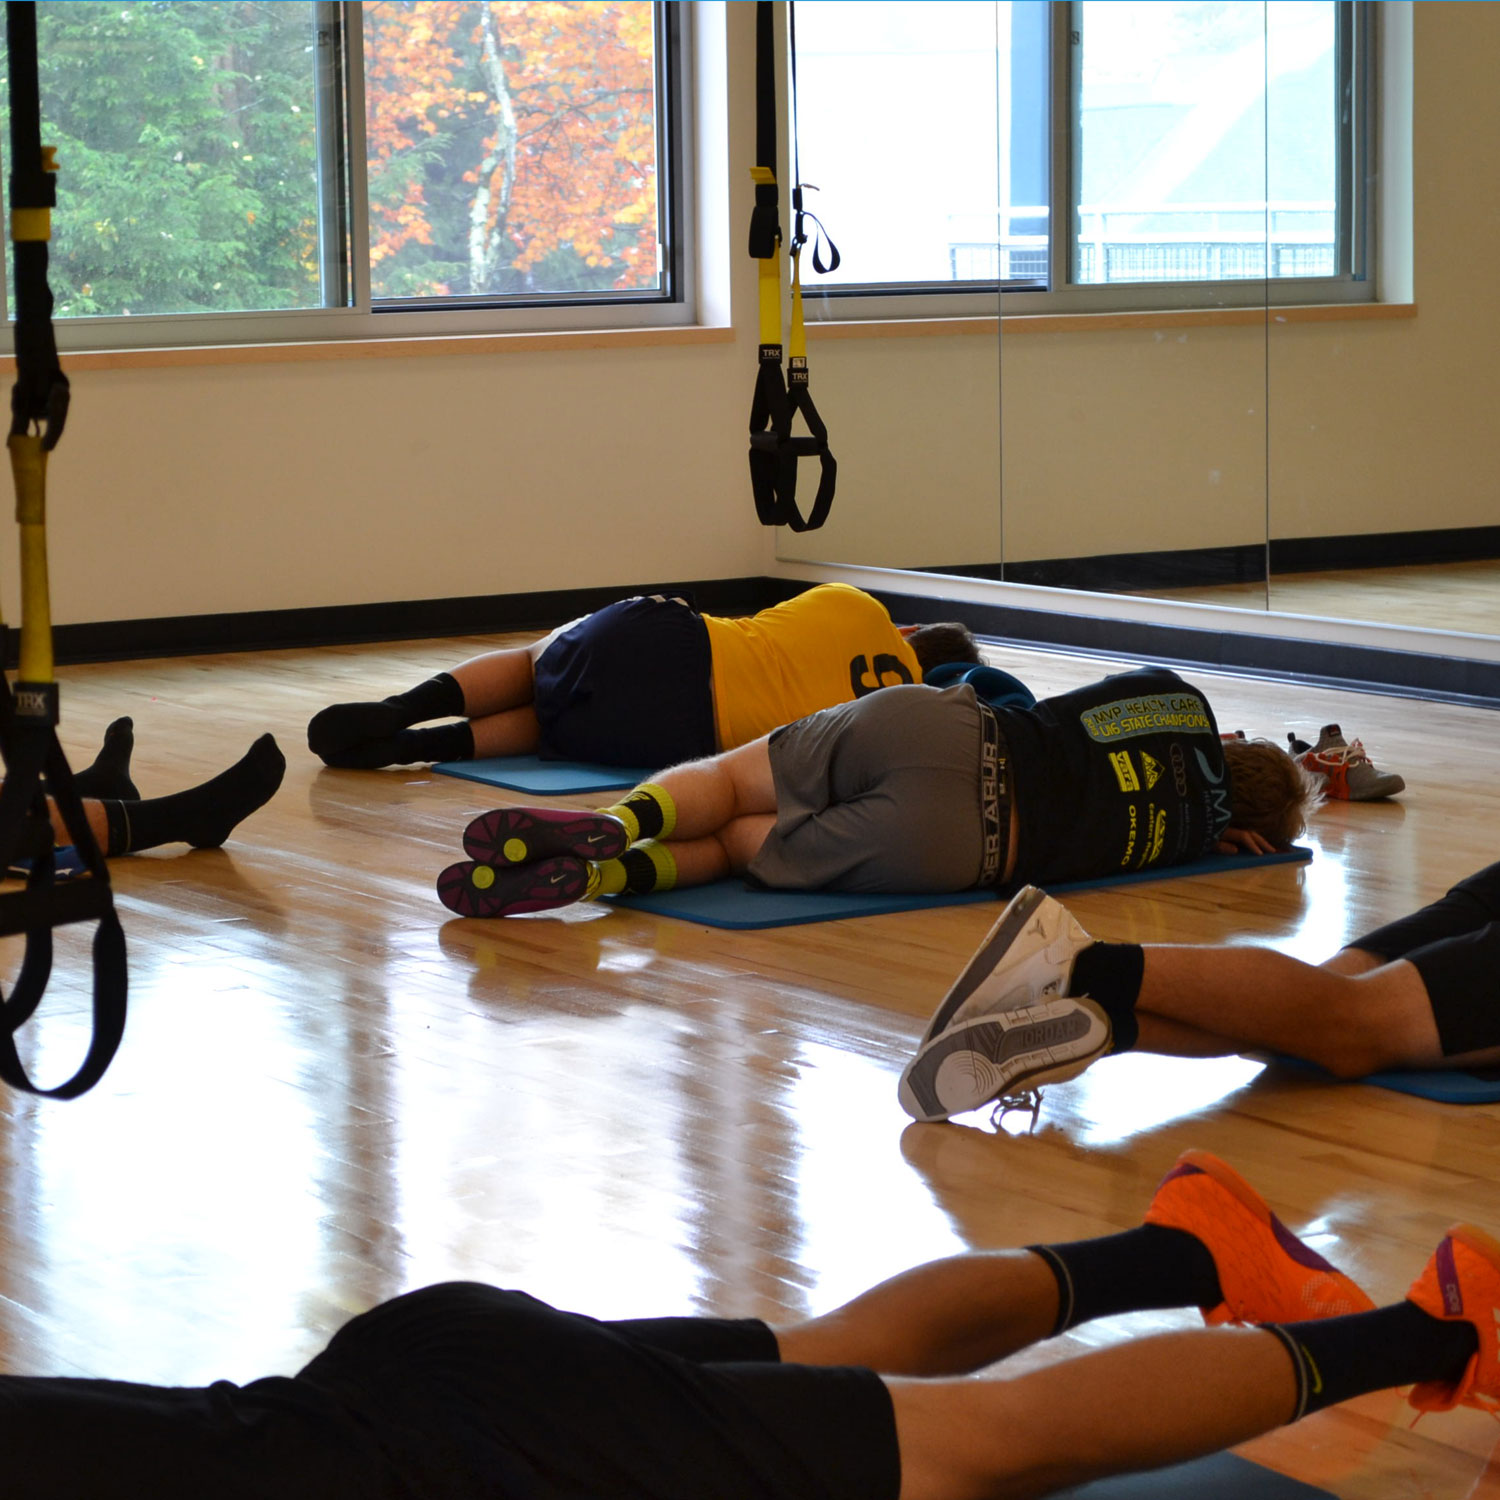 Athletes stretch out in the yoga studio space outfitted with TRX equipment.